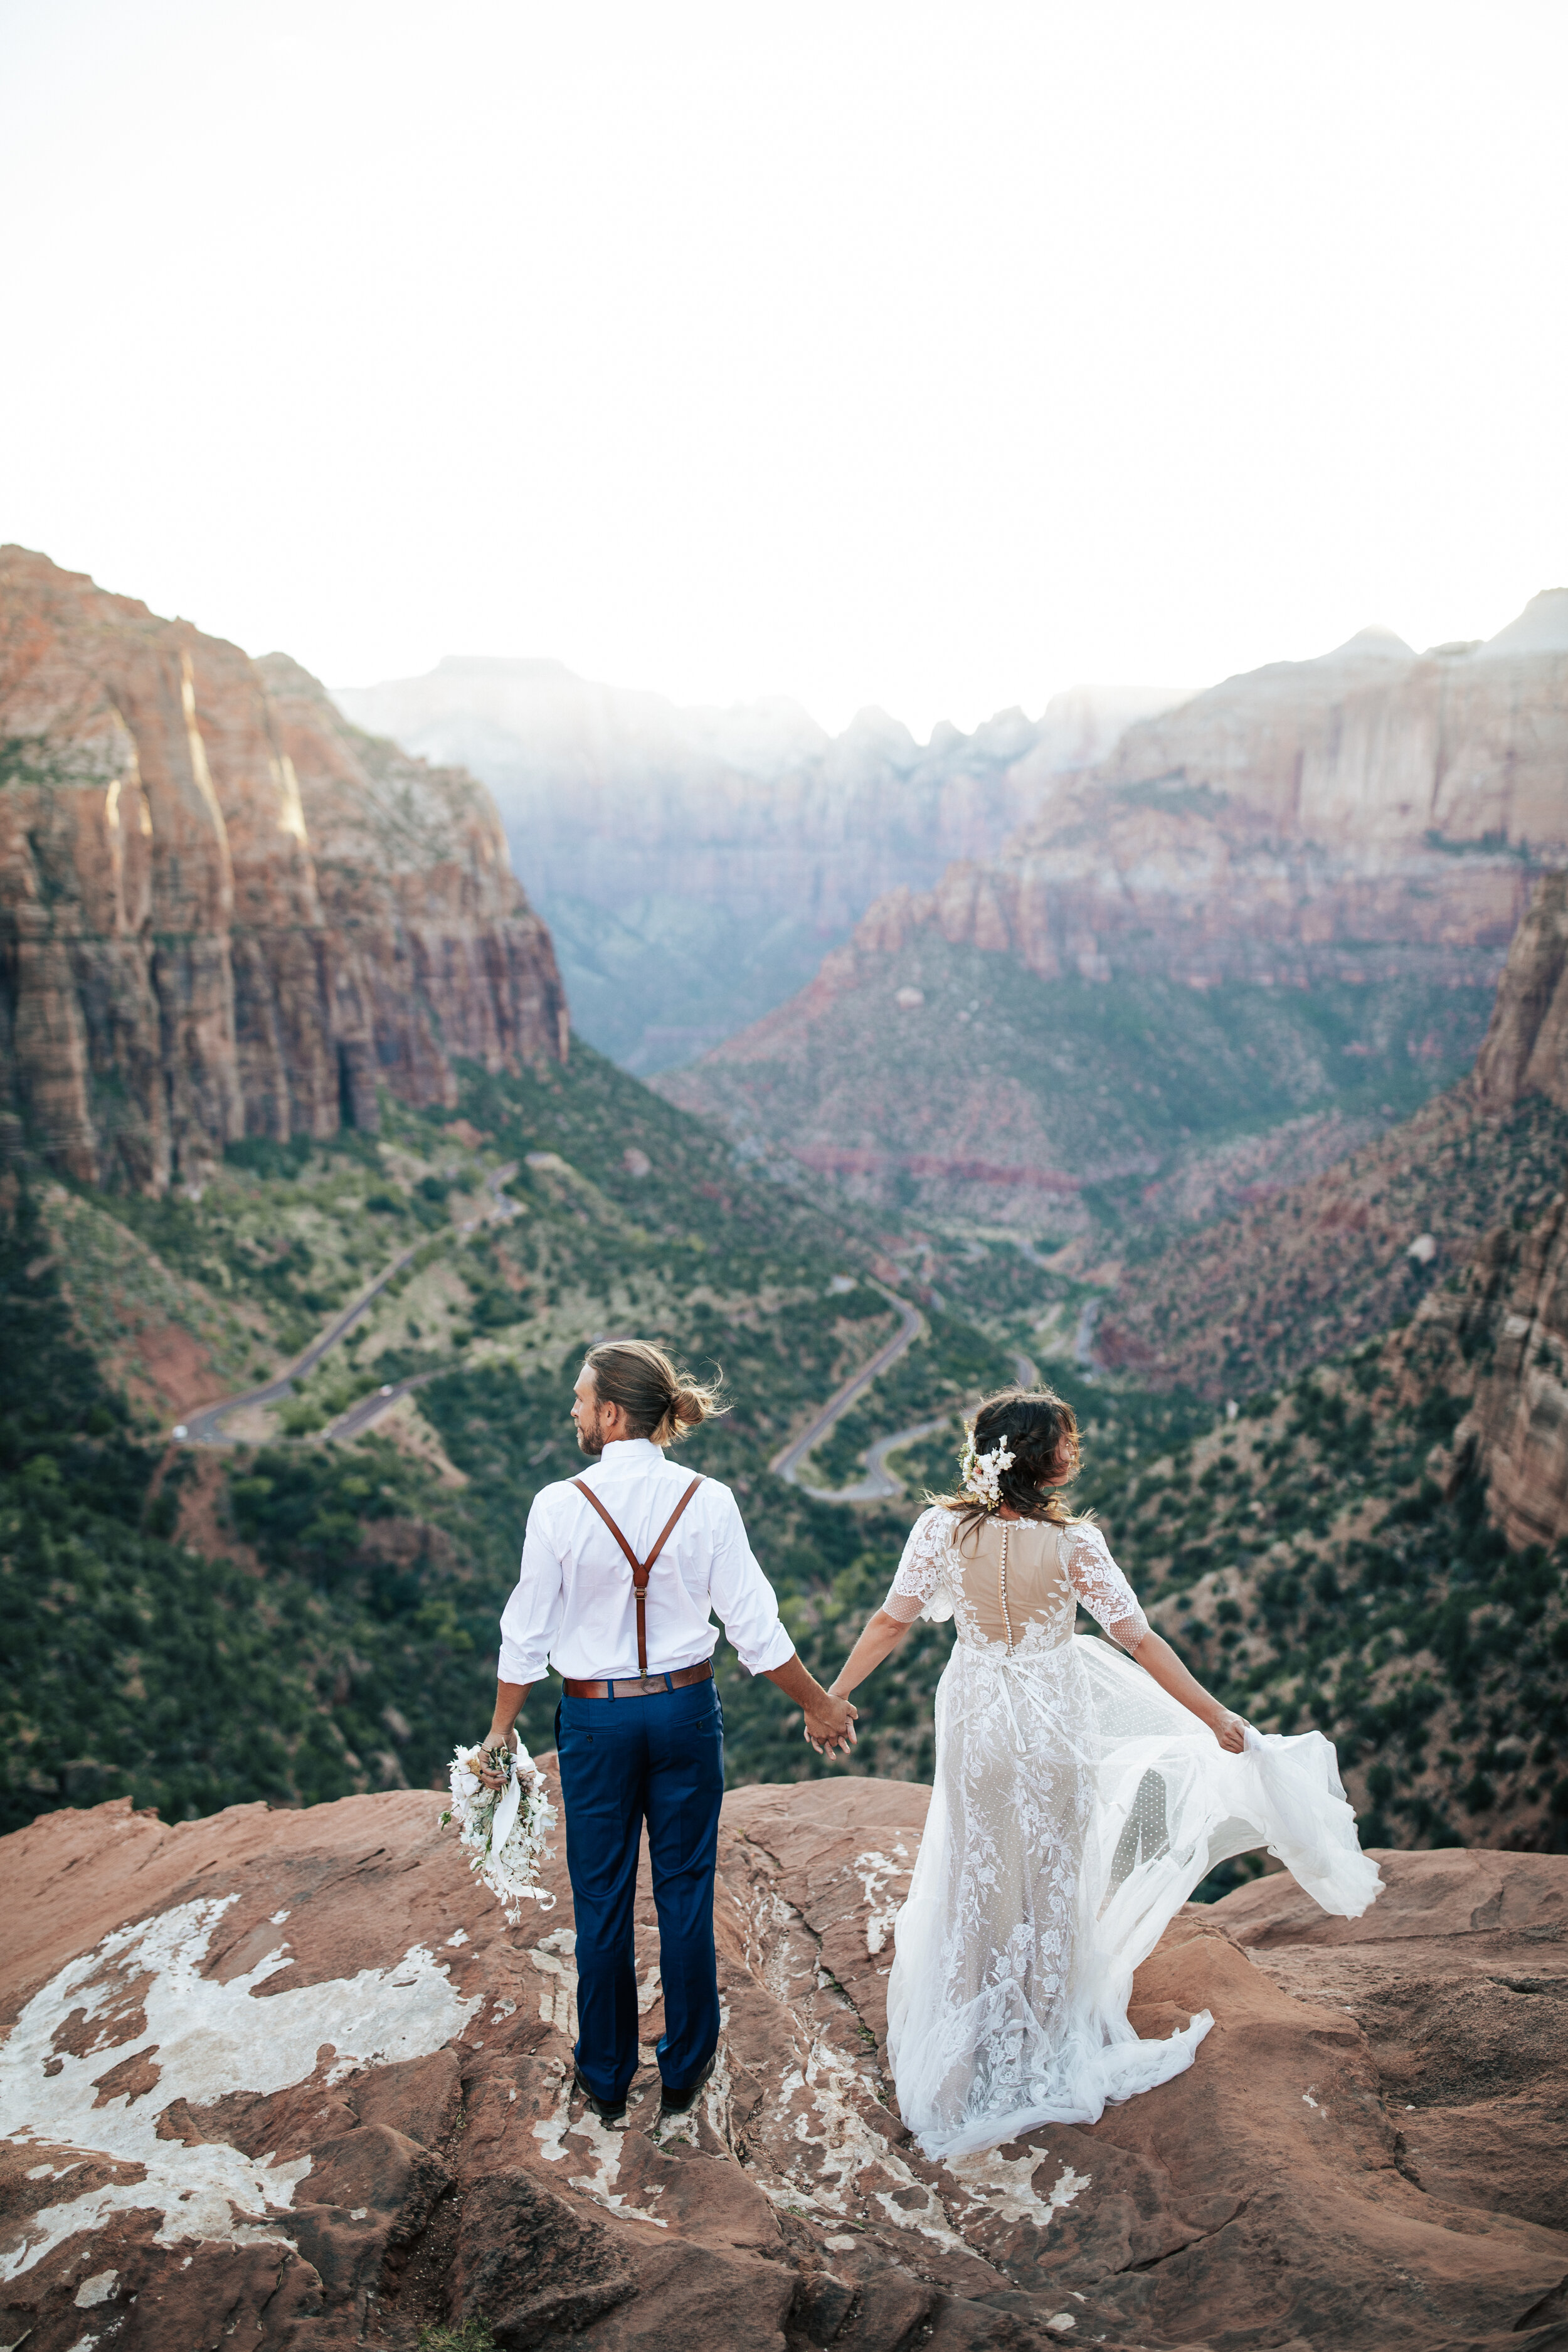  A newly married couple look out a the beautiful scenery as they hold hands in a stunning elopement styled photo shoot by Emily Jenkins Photography in Zion National Park. Utah elopement location inspiration ideas and goals outdoor wedding inspiration